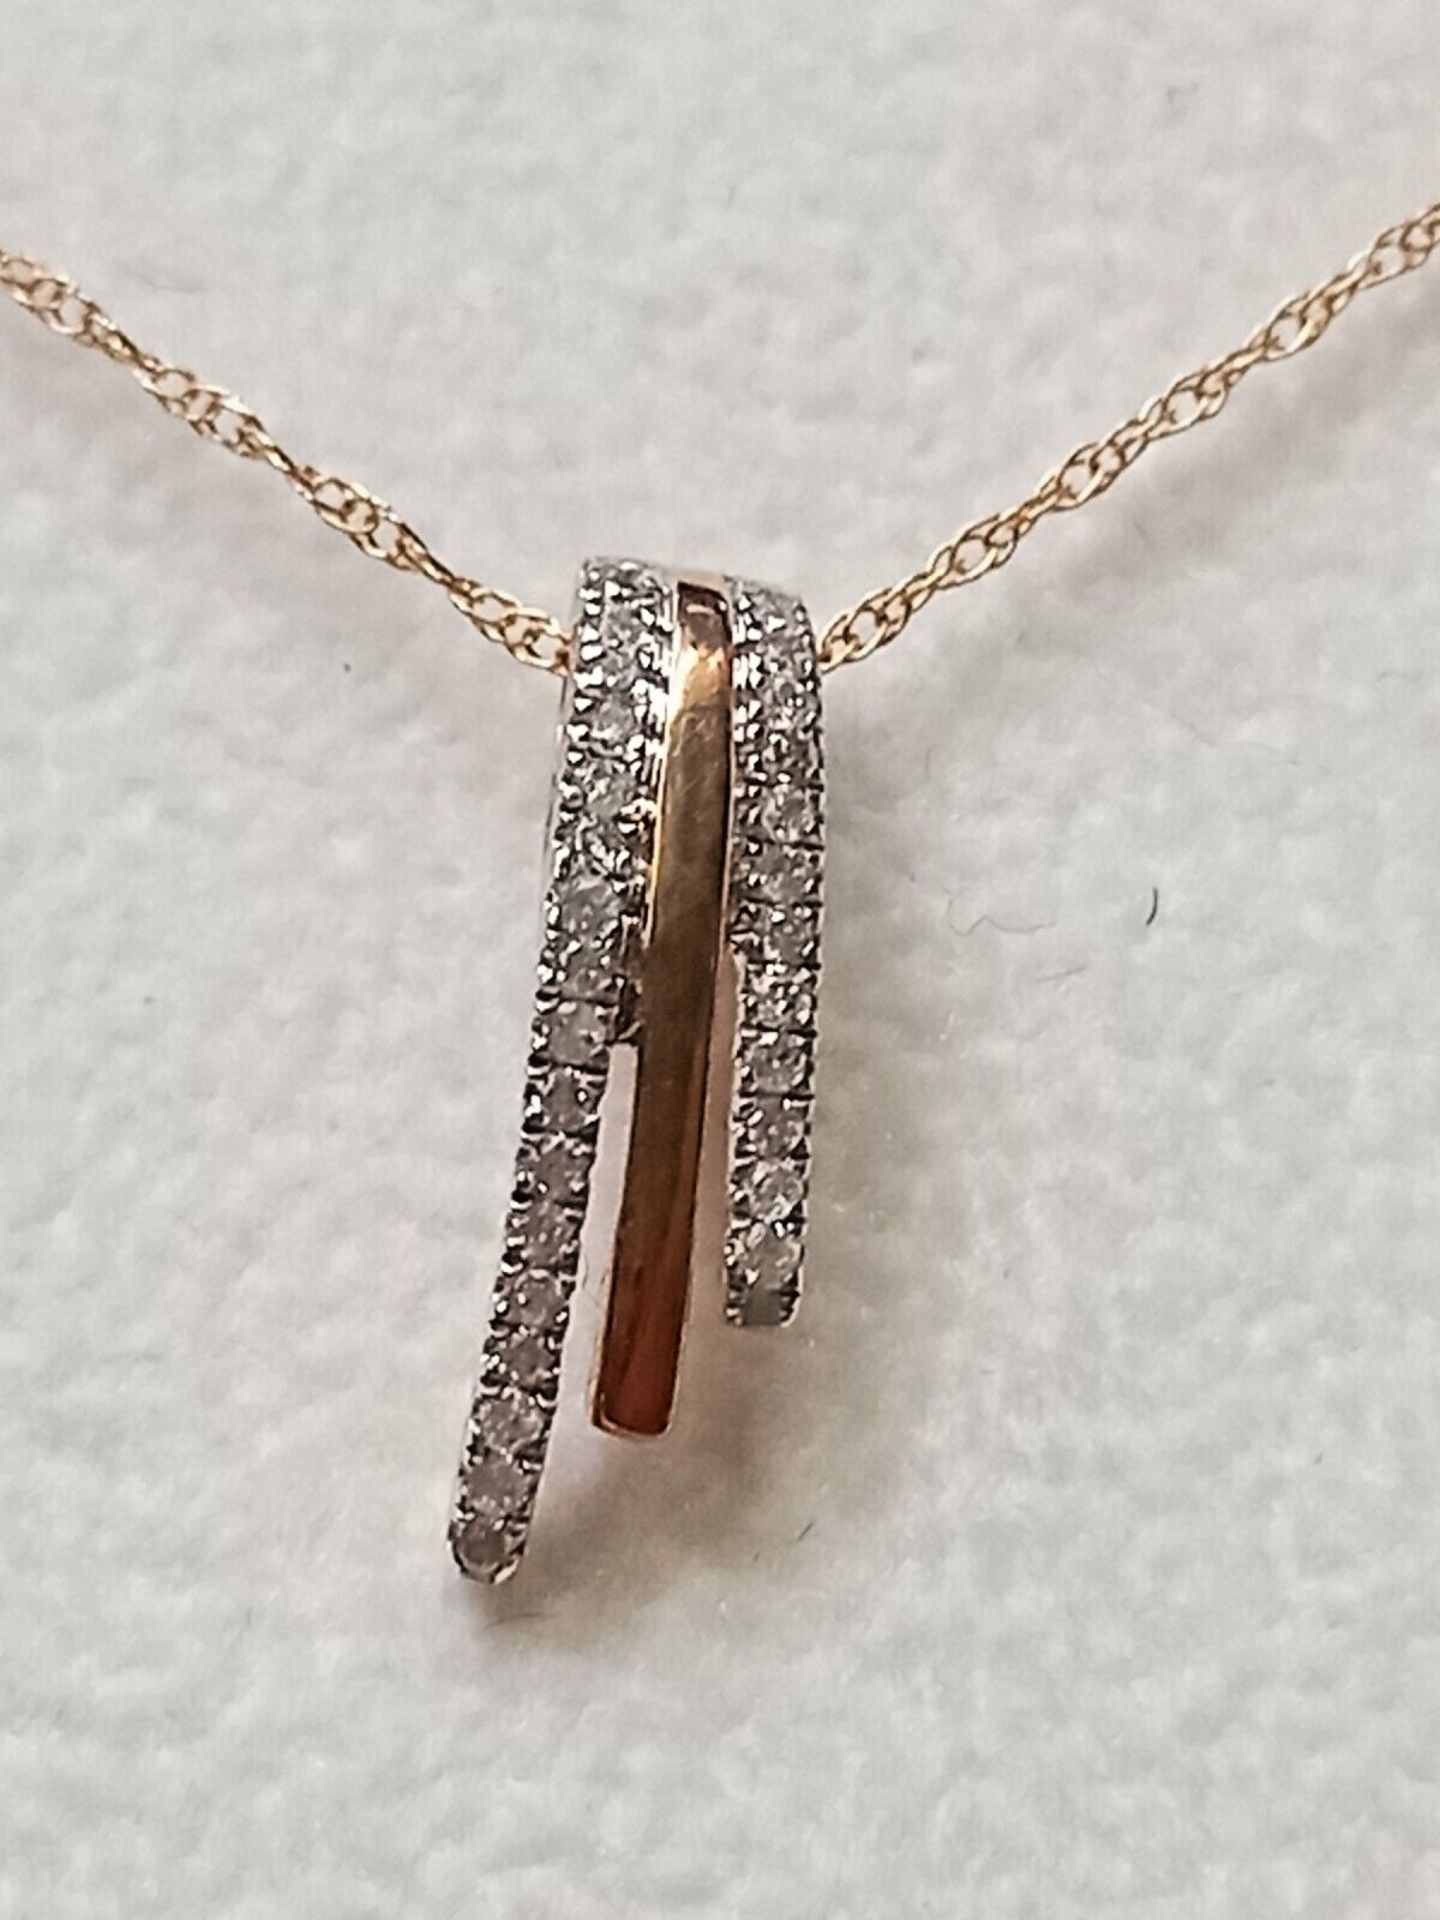 0.24CT DIAMOND ROSE GOLD PENDANT /9CT FINE GOLD CHAIN IN GIFT BOX WITH VALUATION CERTIFICATE